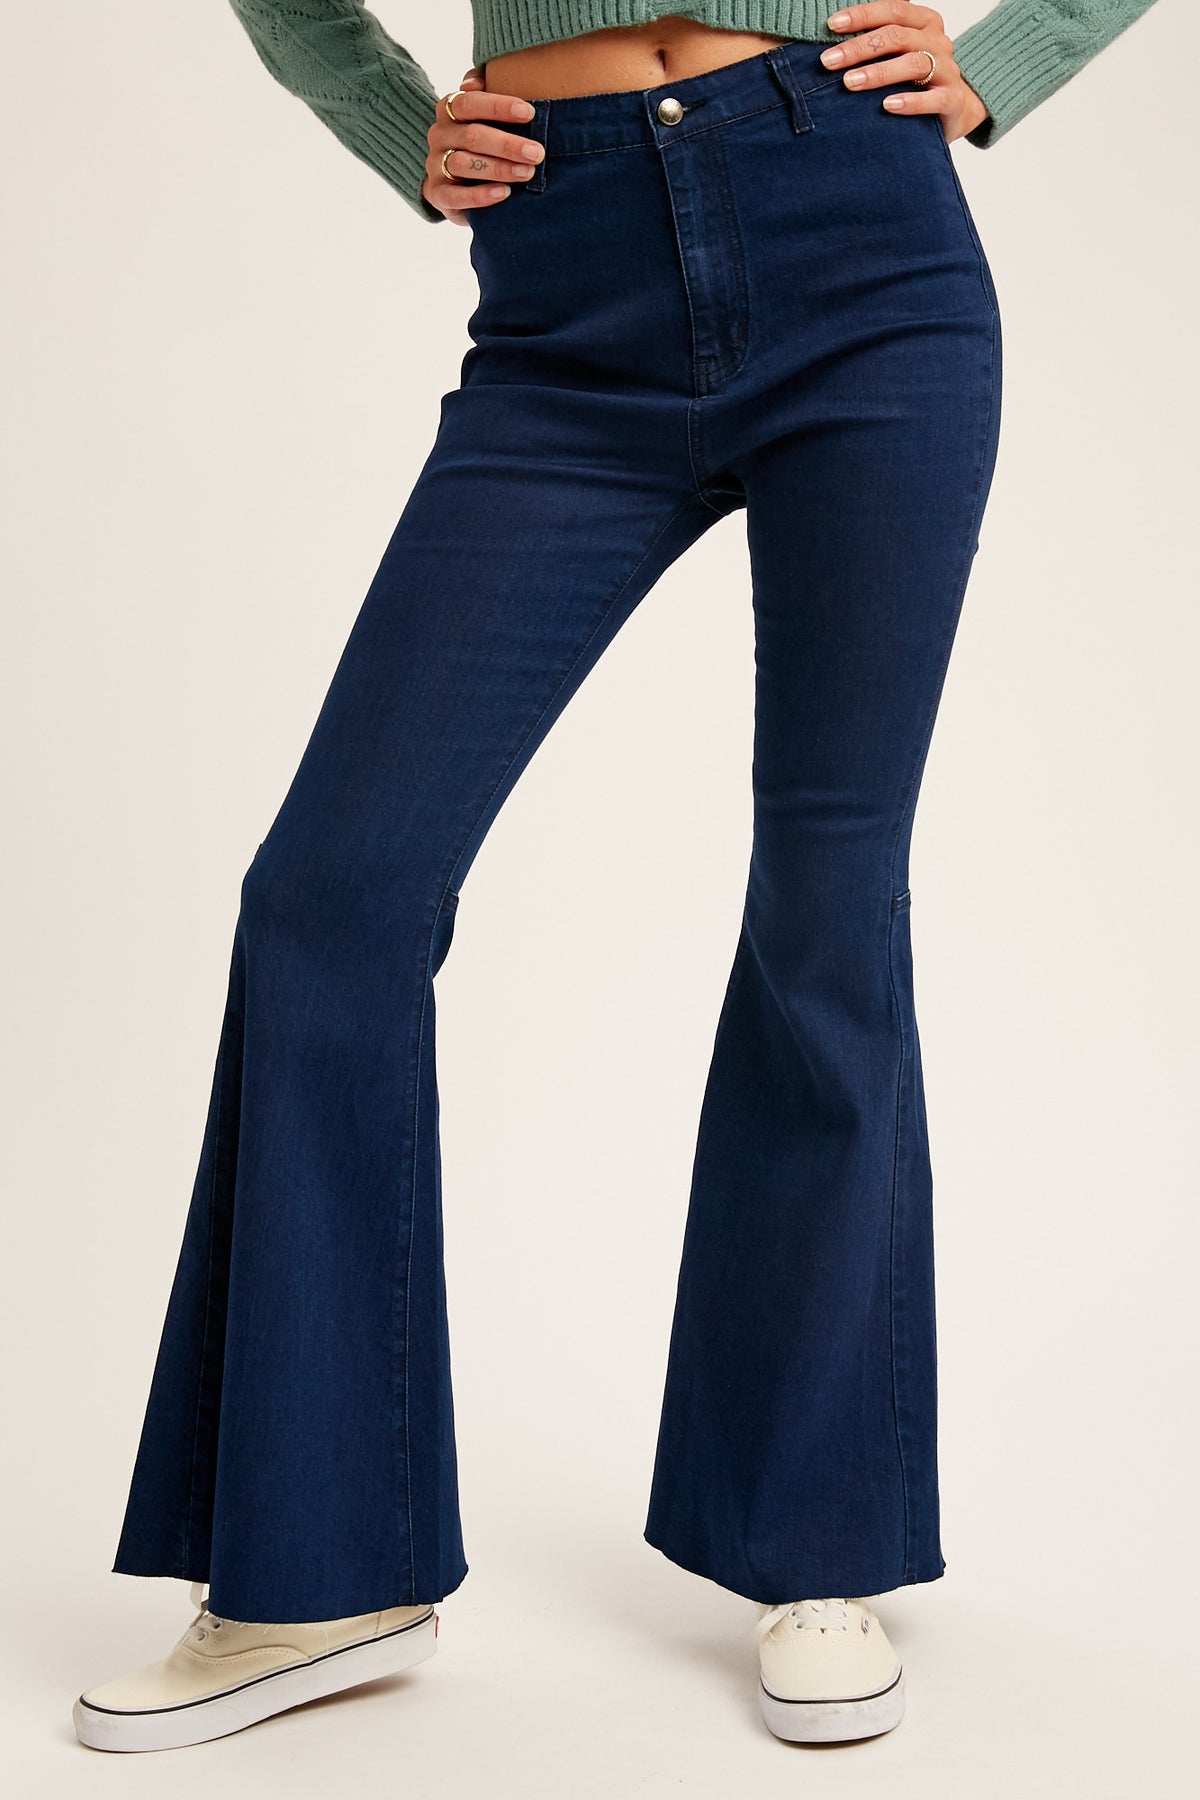 Stretched Extra Wide Flare Denim Pants